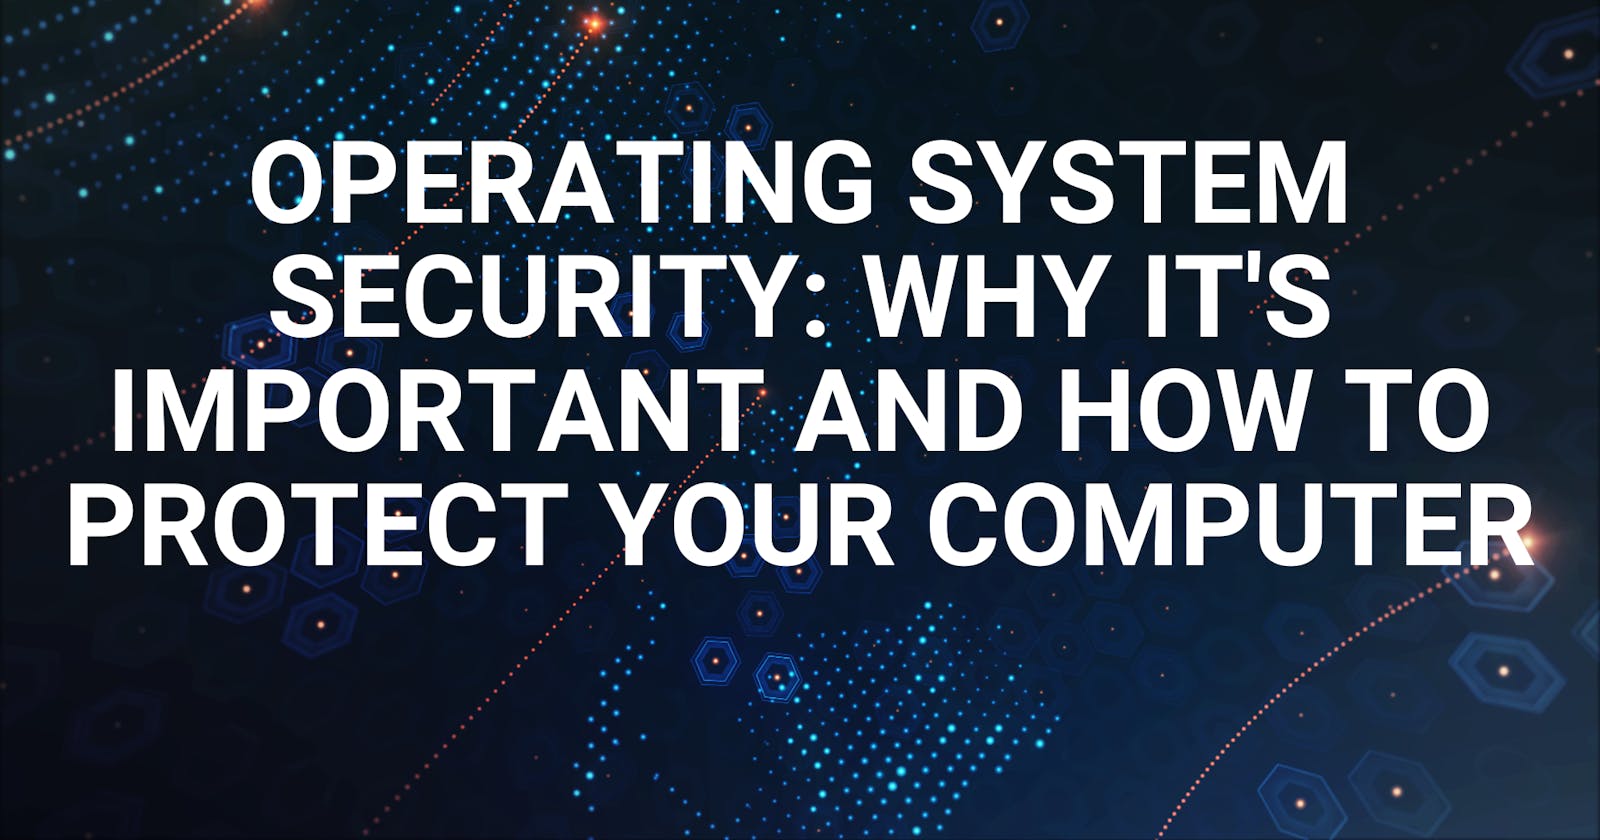 Operating System Security: Why It's Important and How to Protect Your Computer